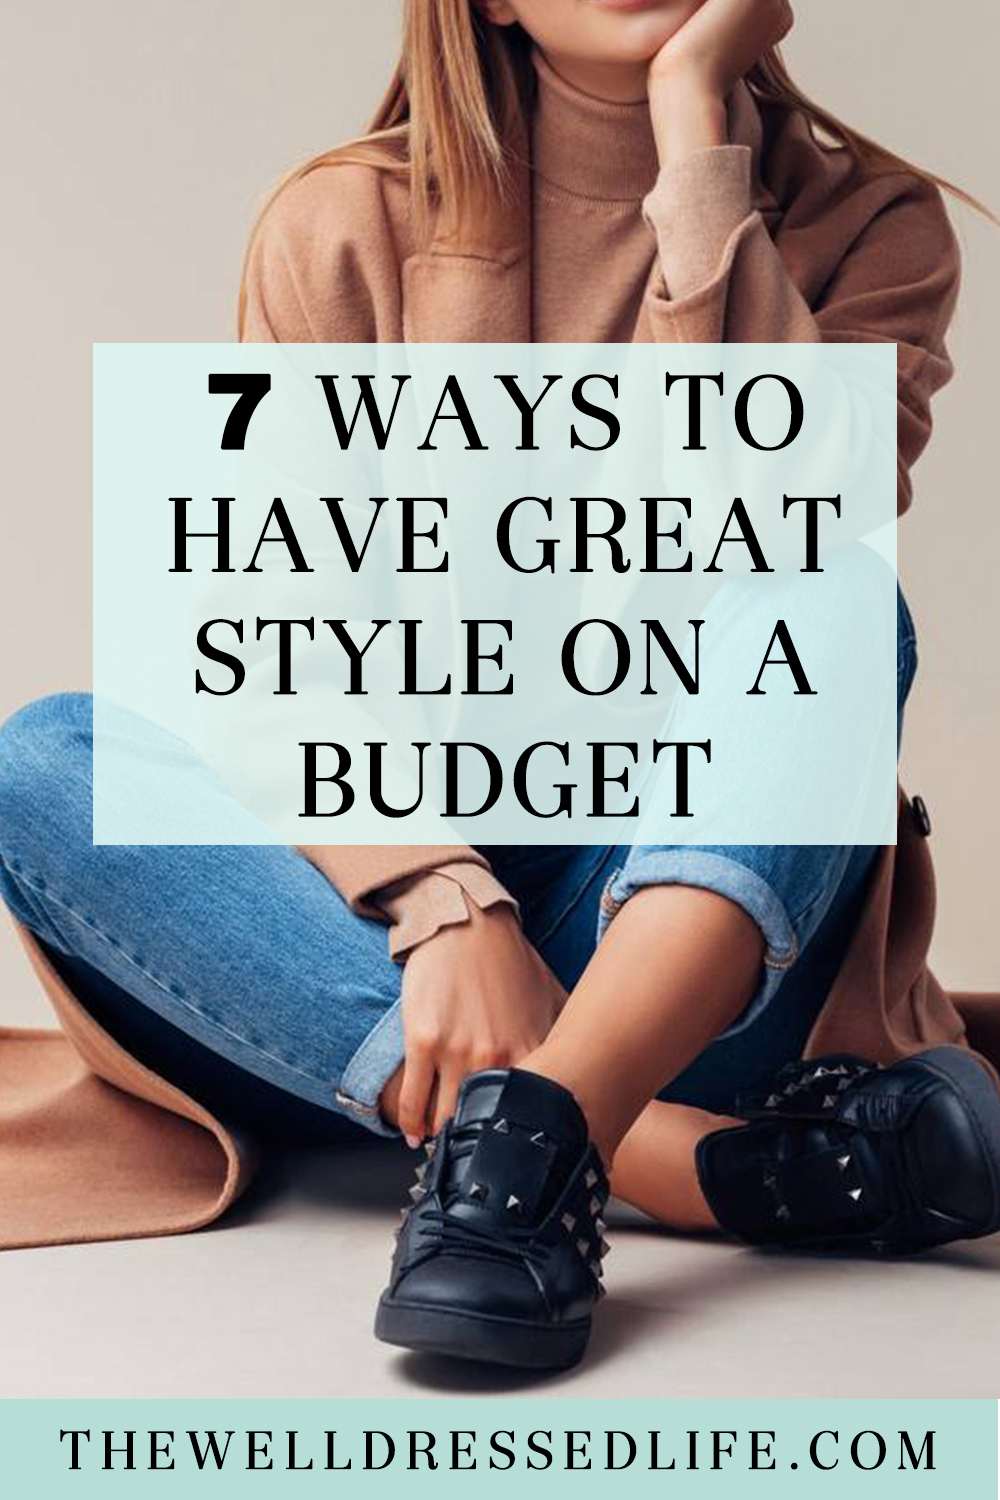 Best of 2021: 7 Ways to Have Great Style on a Budget